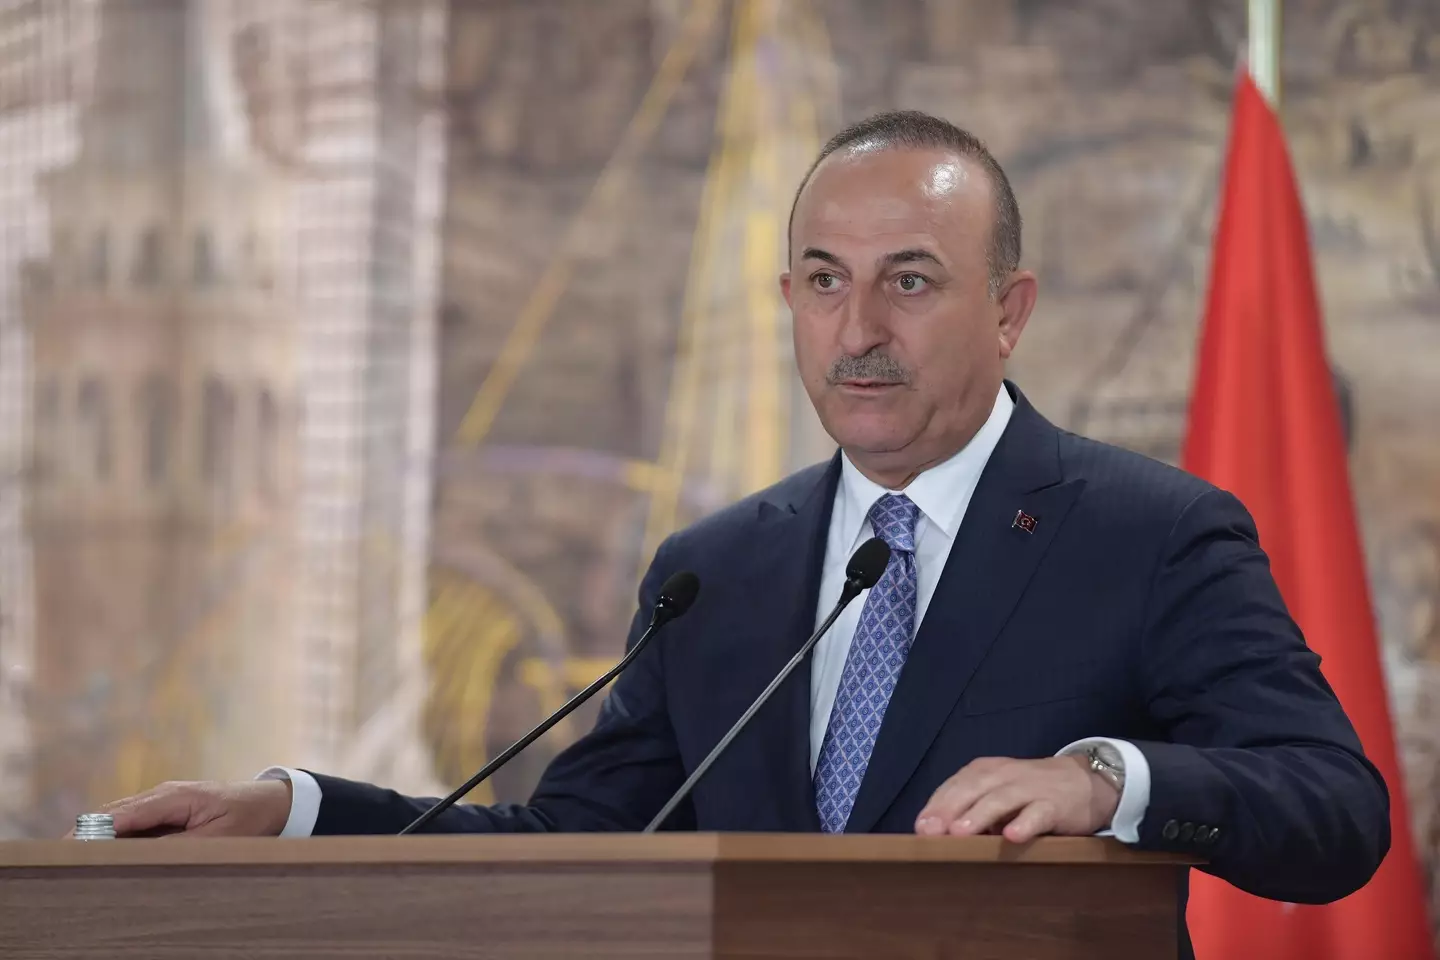 Mevlut Cavusoglu wrote a letter urging the UN to use the new name.